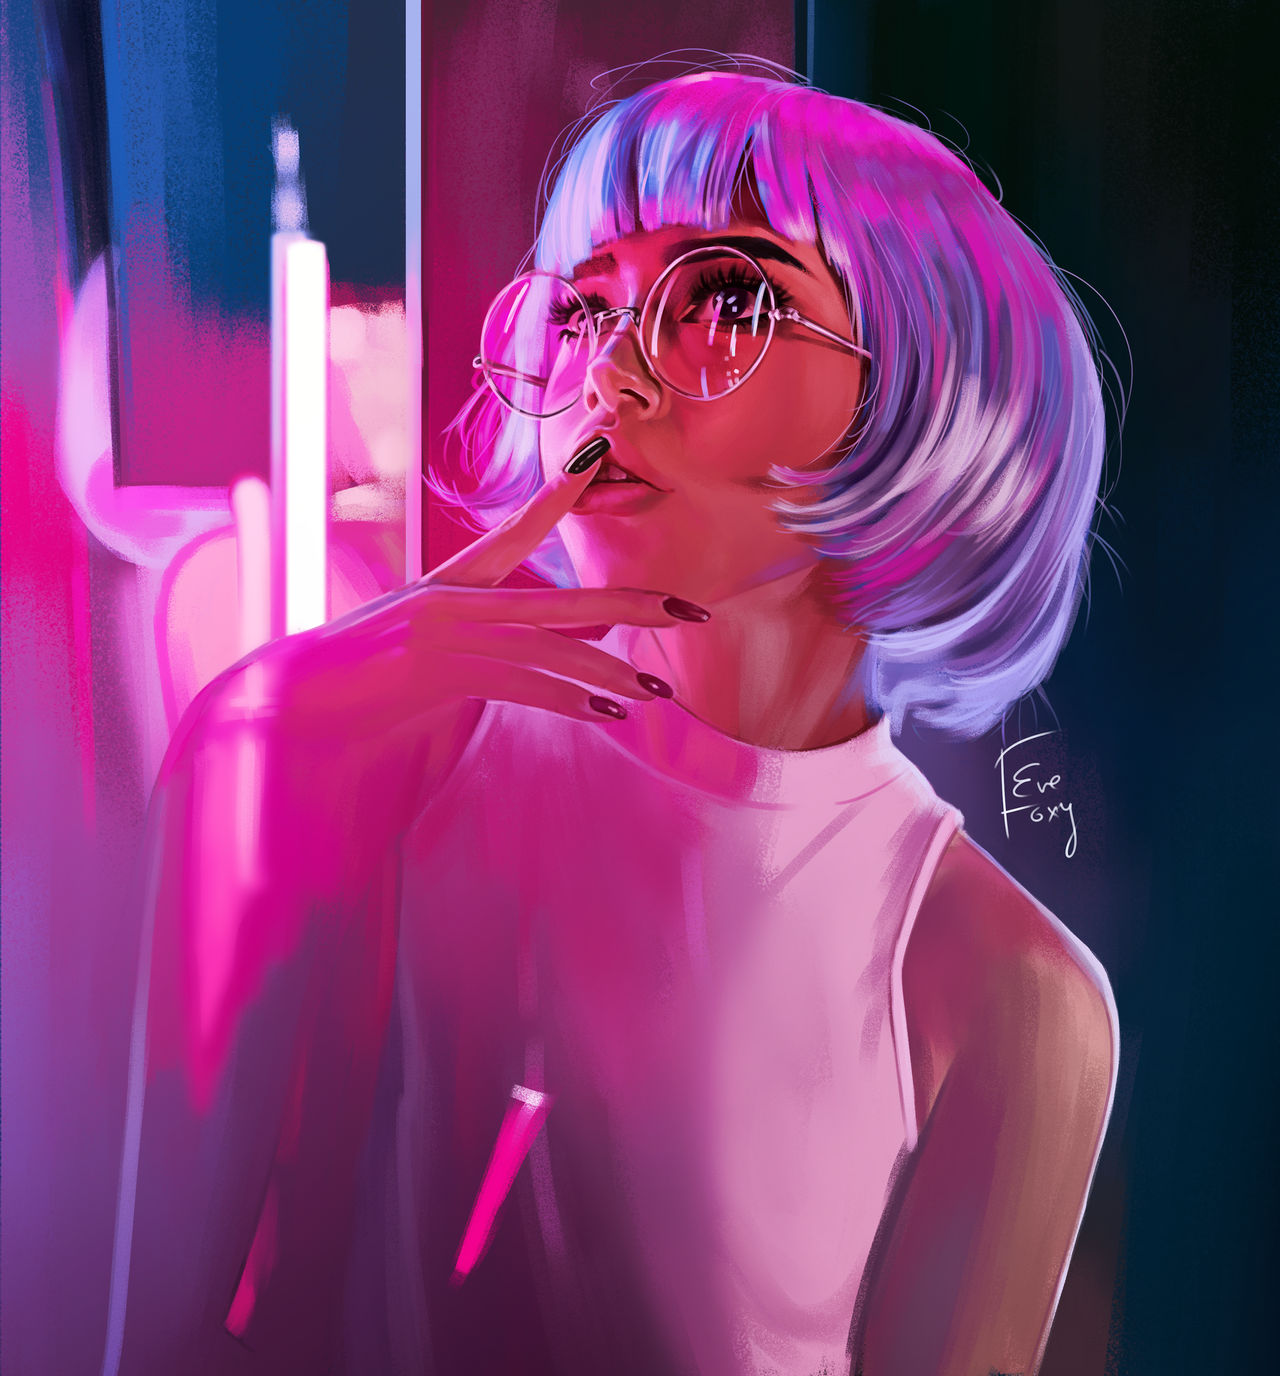 General 1280x1376 artwork women purple hair painted nails glasses women with glasses neon